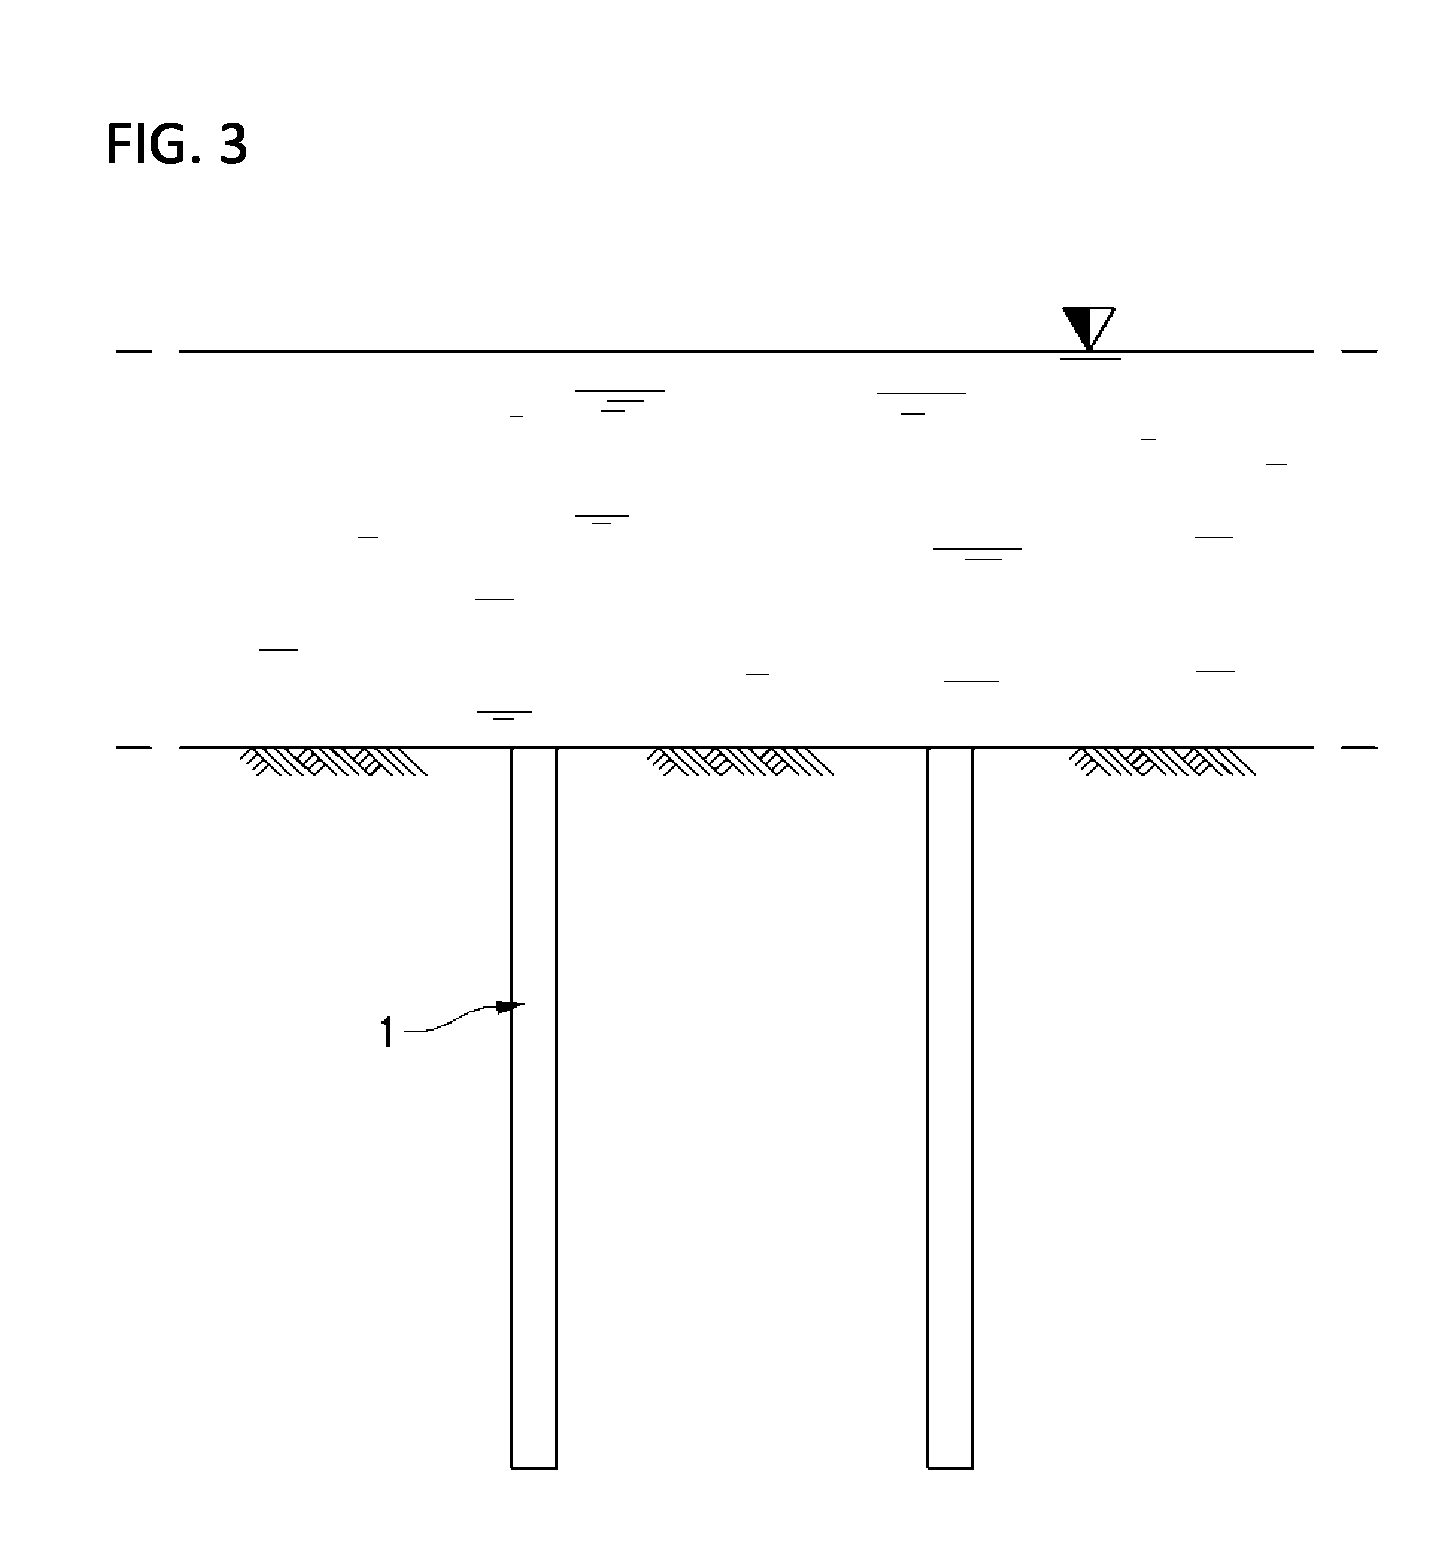 Seawater resistant grout material composition and method for constructing offshore wind turbine structure using same